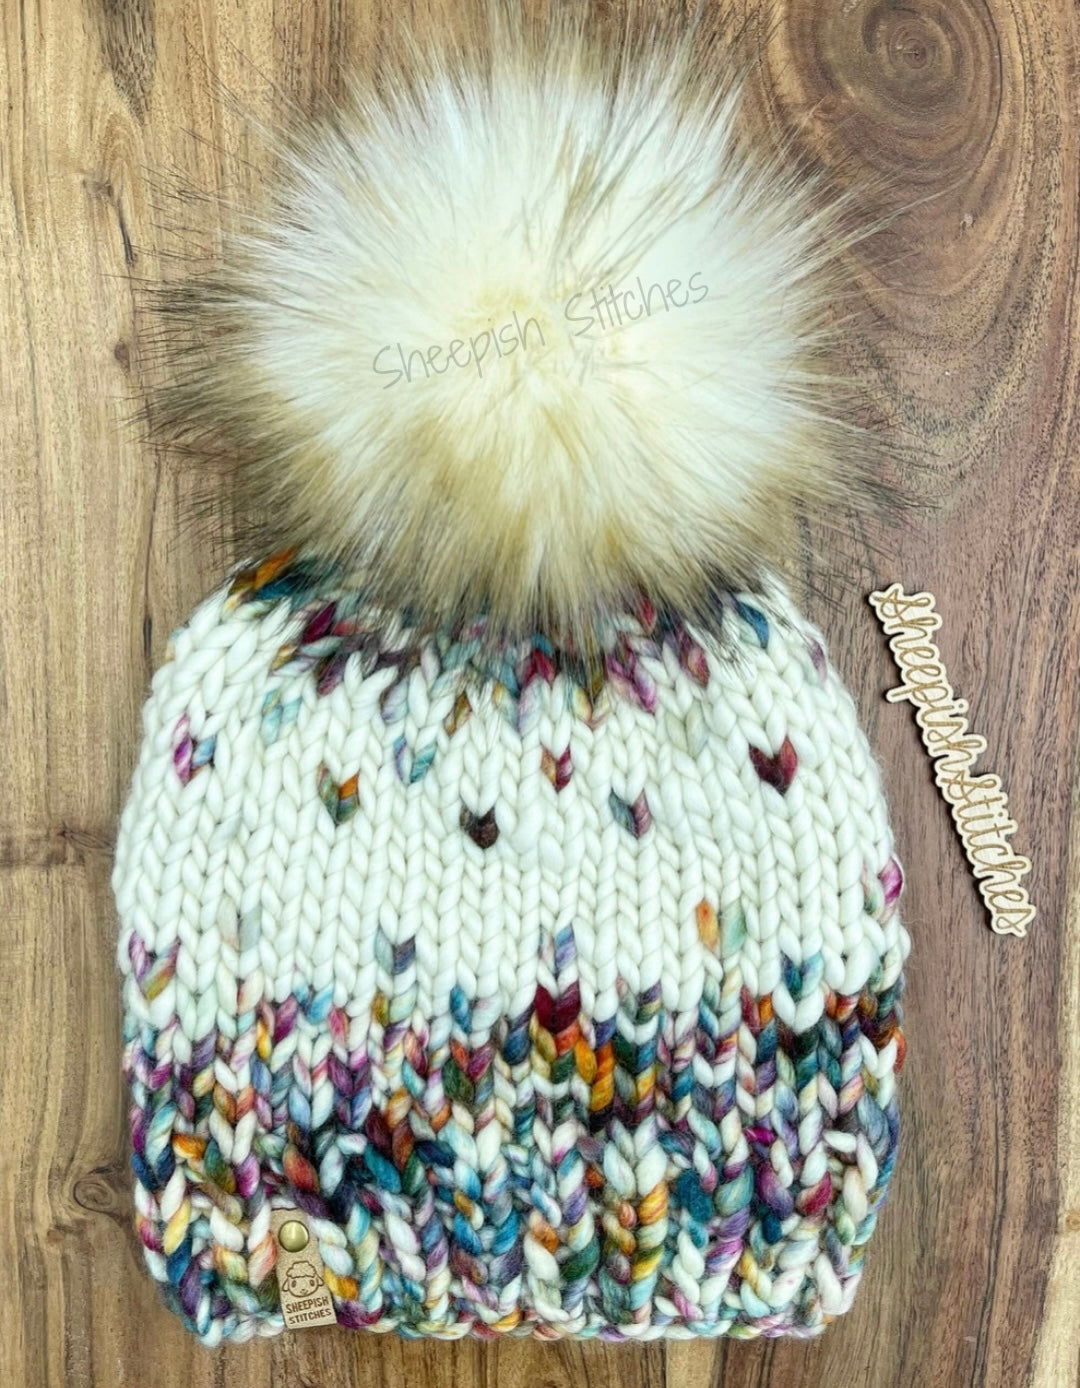 Multi Tone with Ivory Accent - Merino Wool Knit Hat with Faux Fur Pom Pom, Hand Knit Luxury Beanie, Ethically Sourced Merino Wool Toque